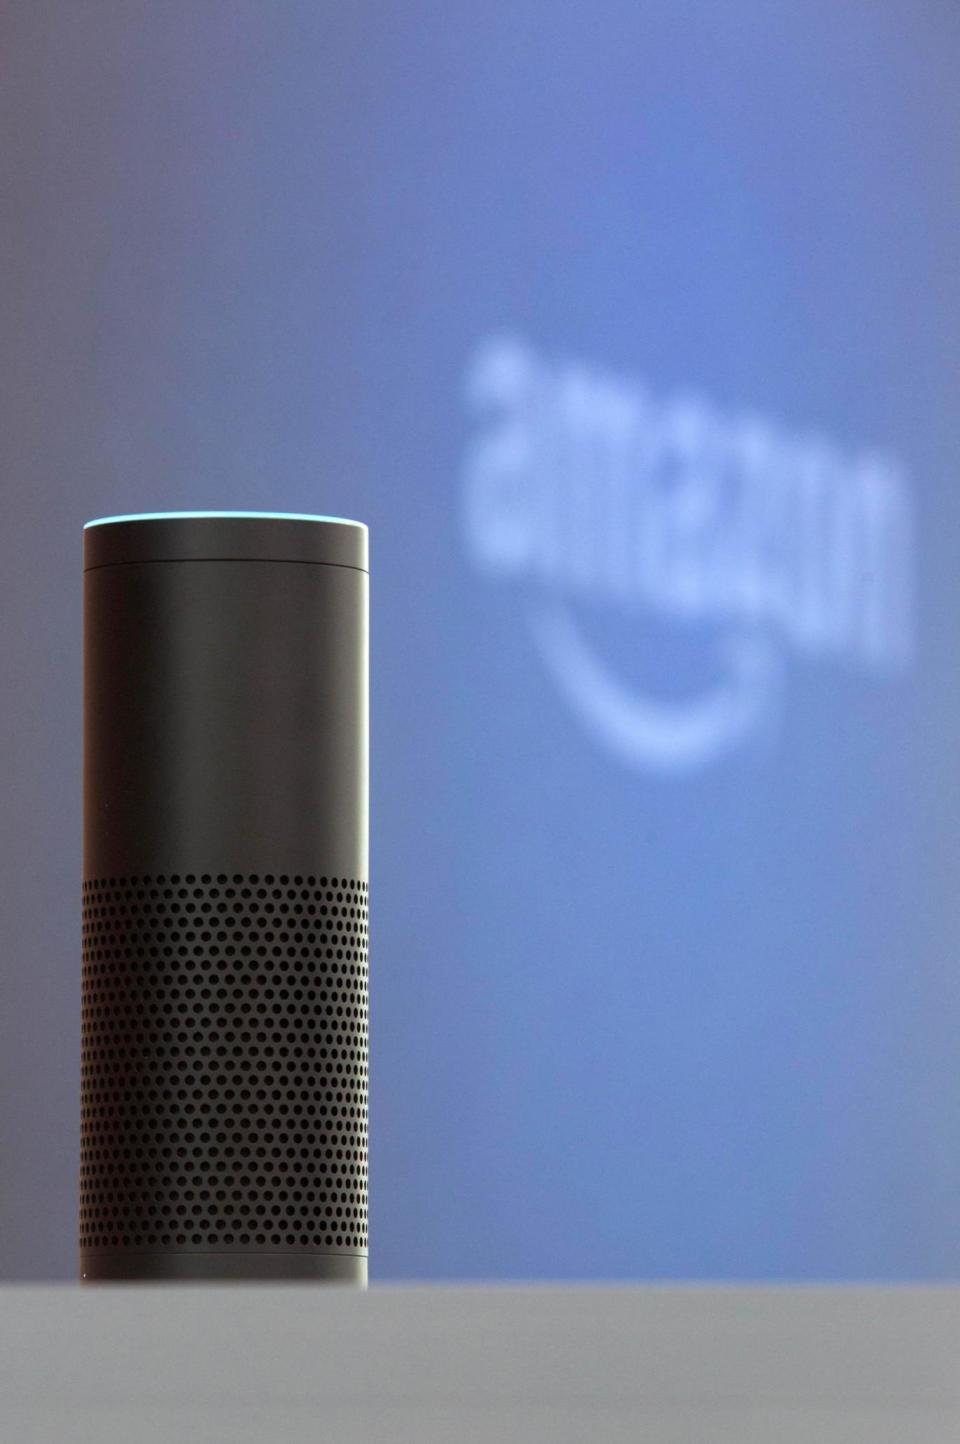 Not just Google: people have cited concerns that their smart speakers, like the Amazon Alexa picture here, are listening in all the time (PA Archive/PA Images)